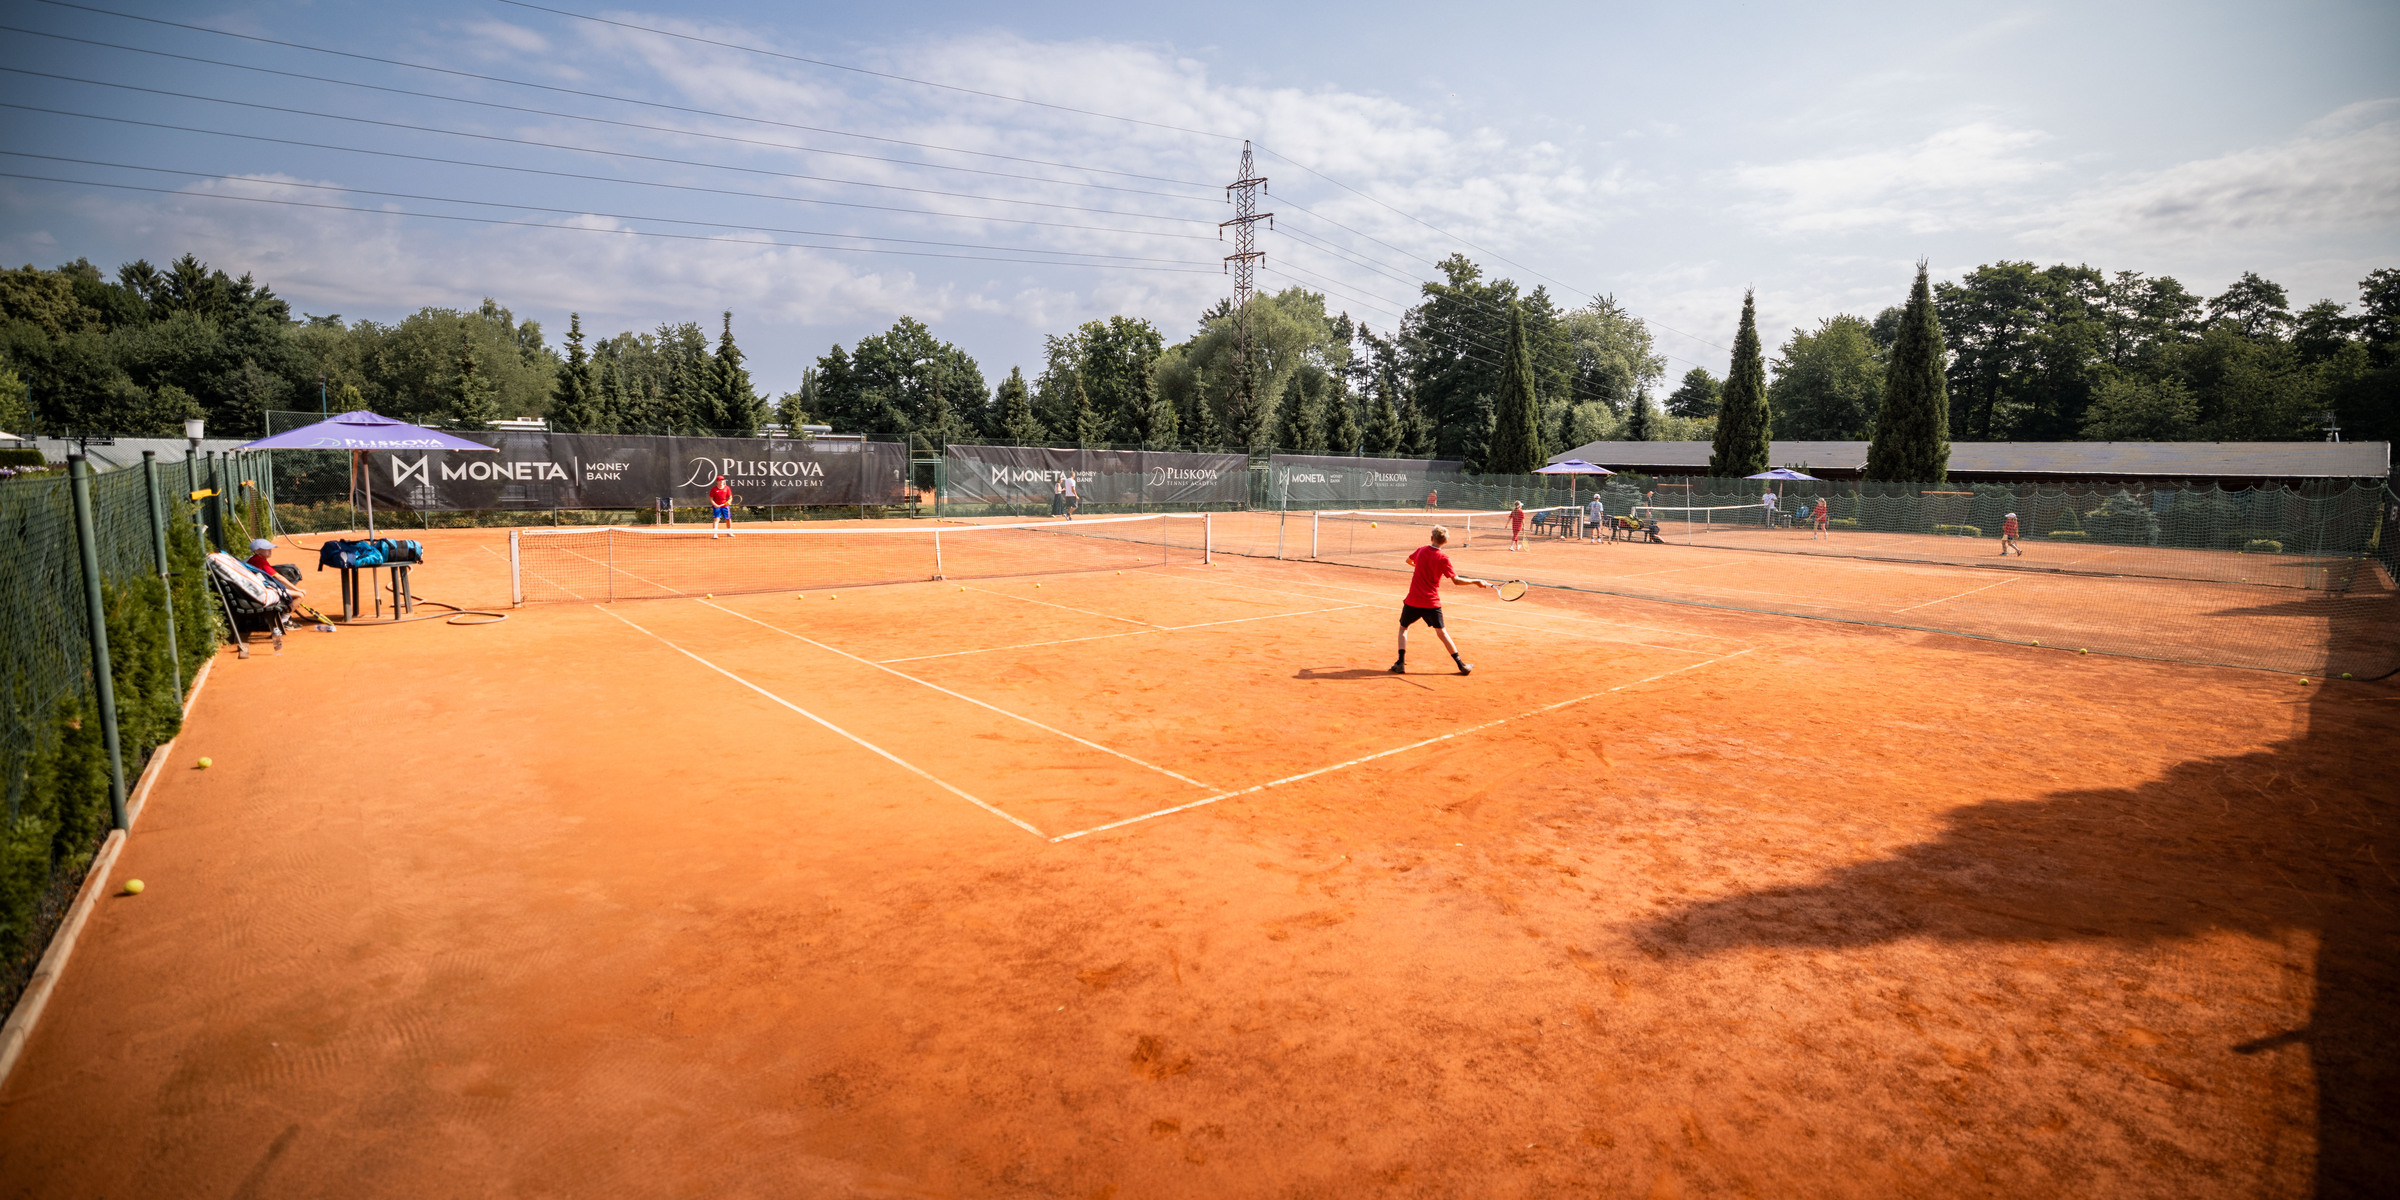 A professional environment for competitive tennis